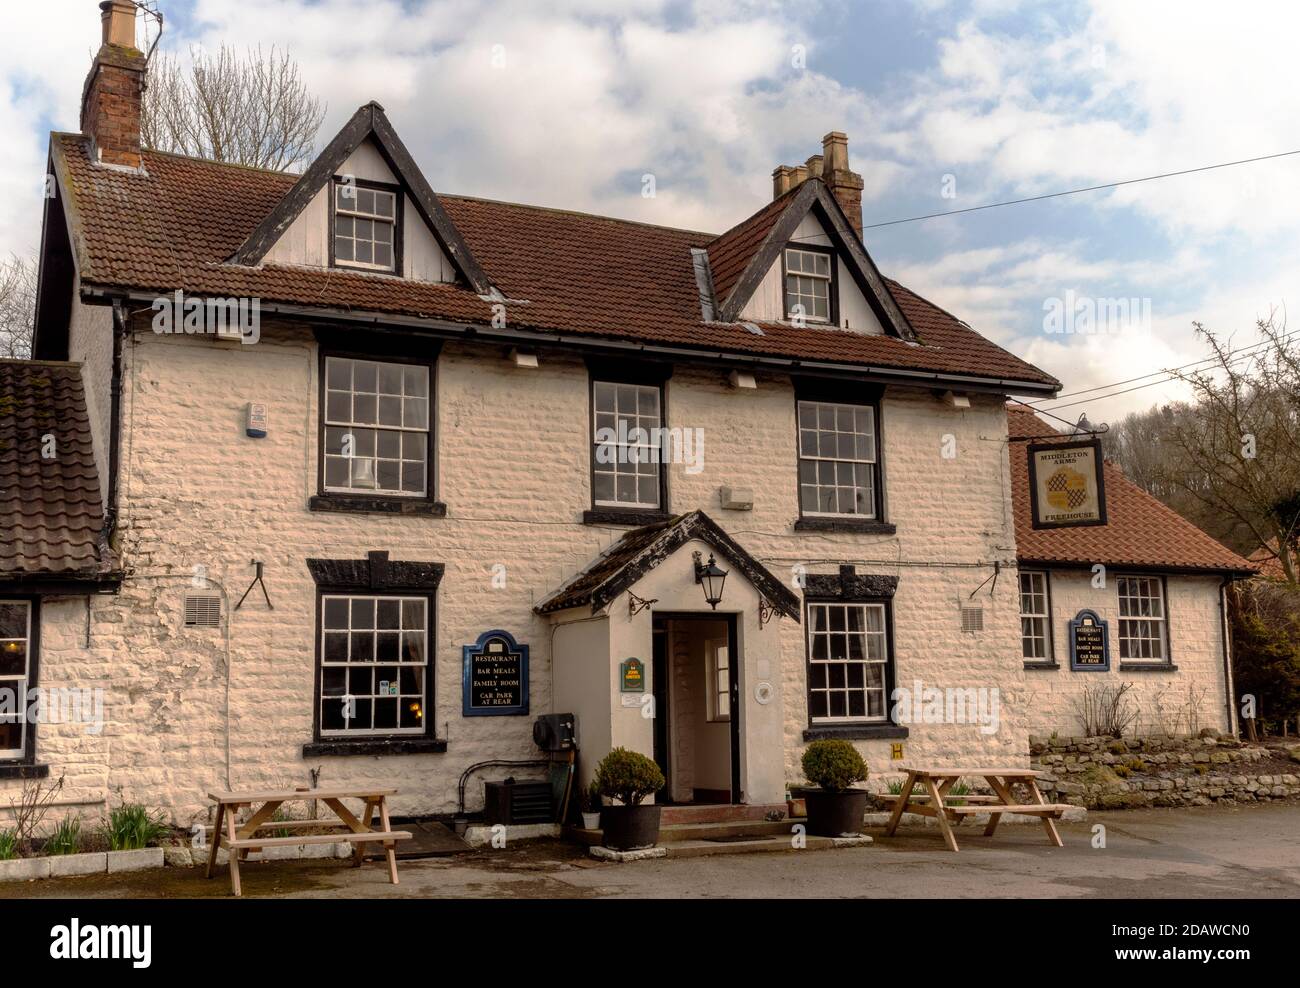 The Middleton Arms Public House and Restaurant, Hogg Lane, North Grimston, Yorkshire, Inghilterra, Regno Unito Foto Stock